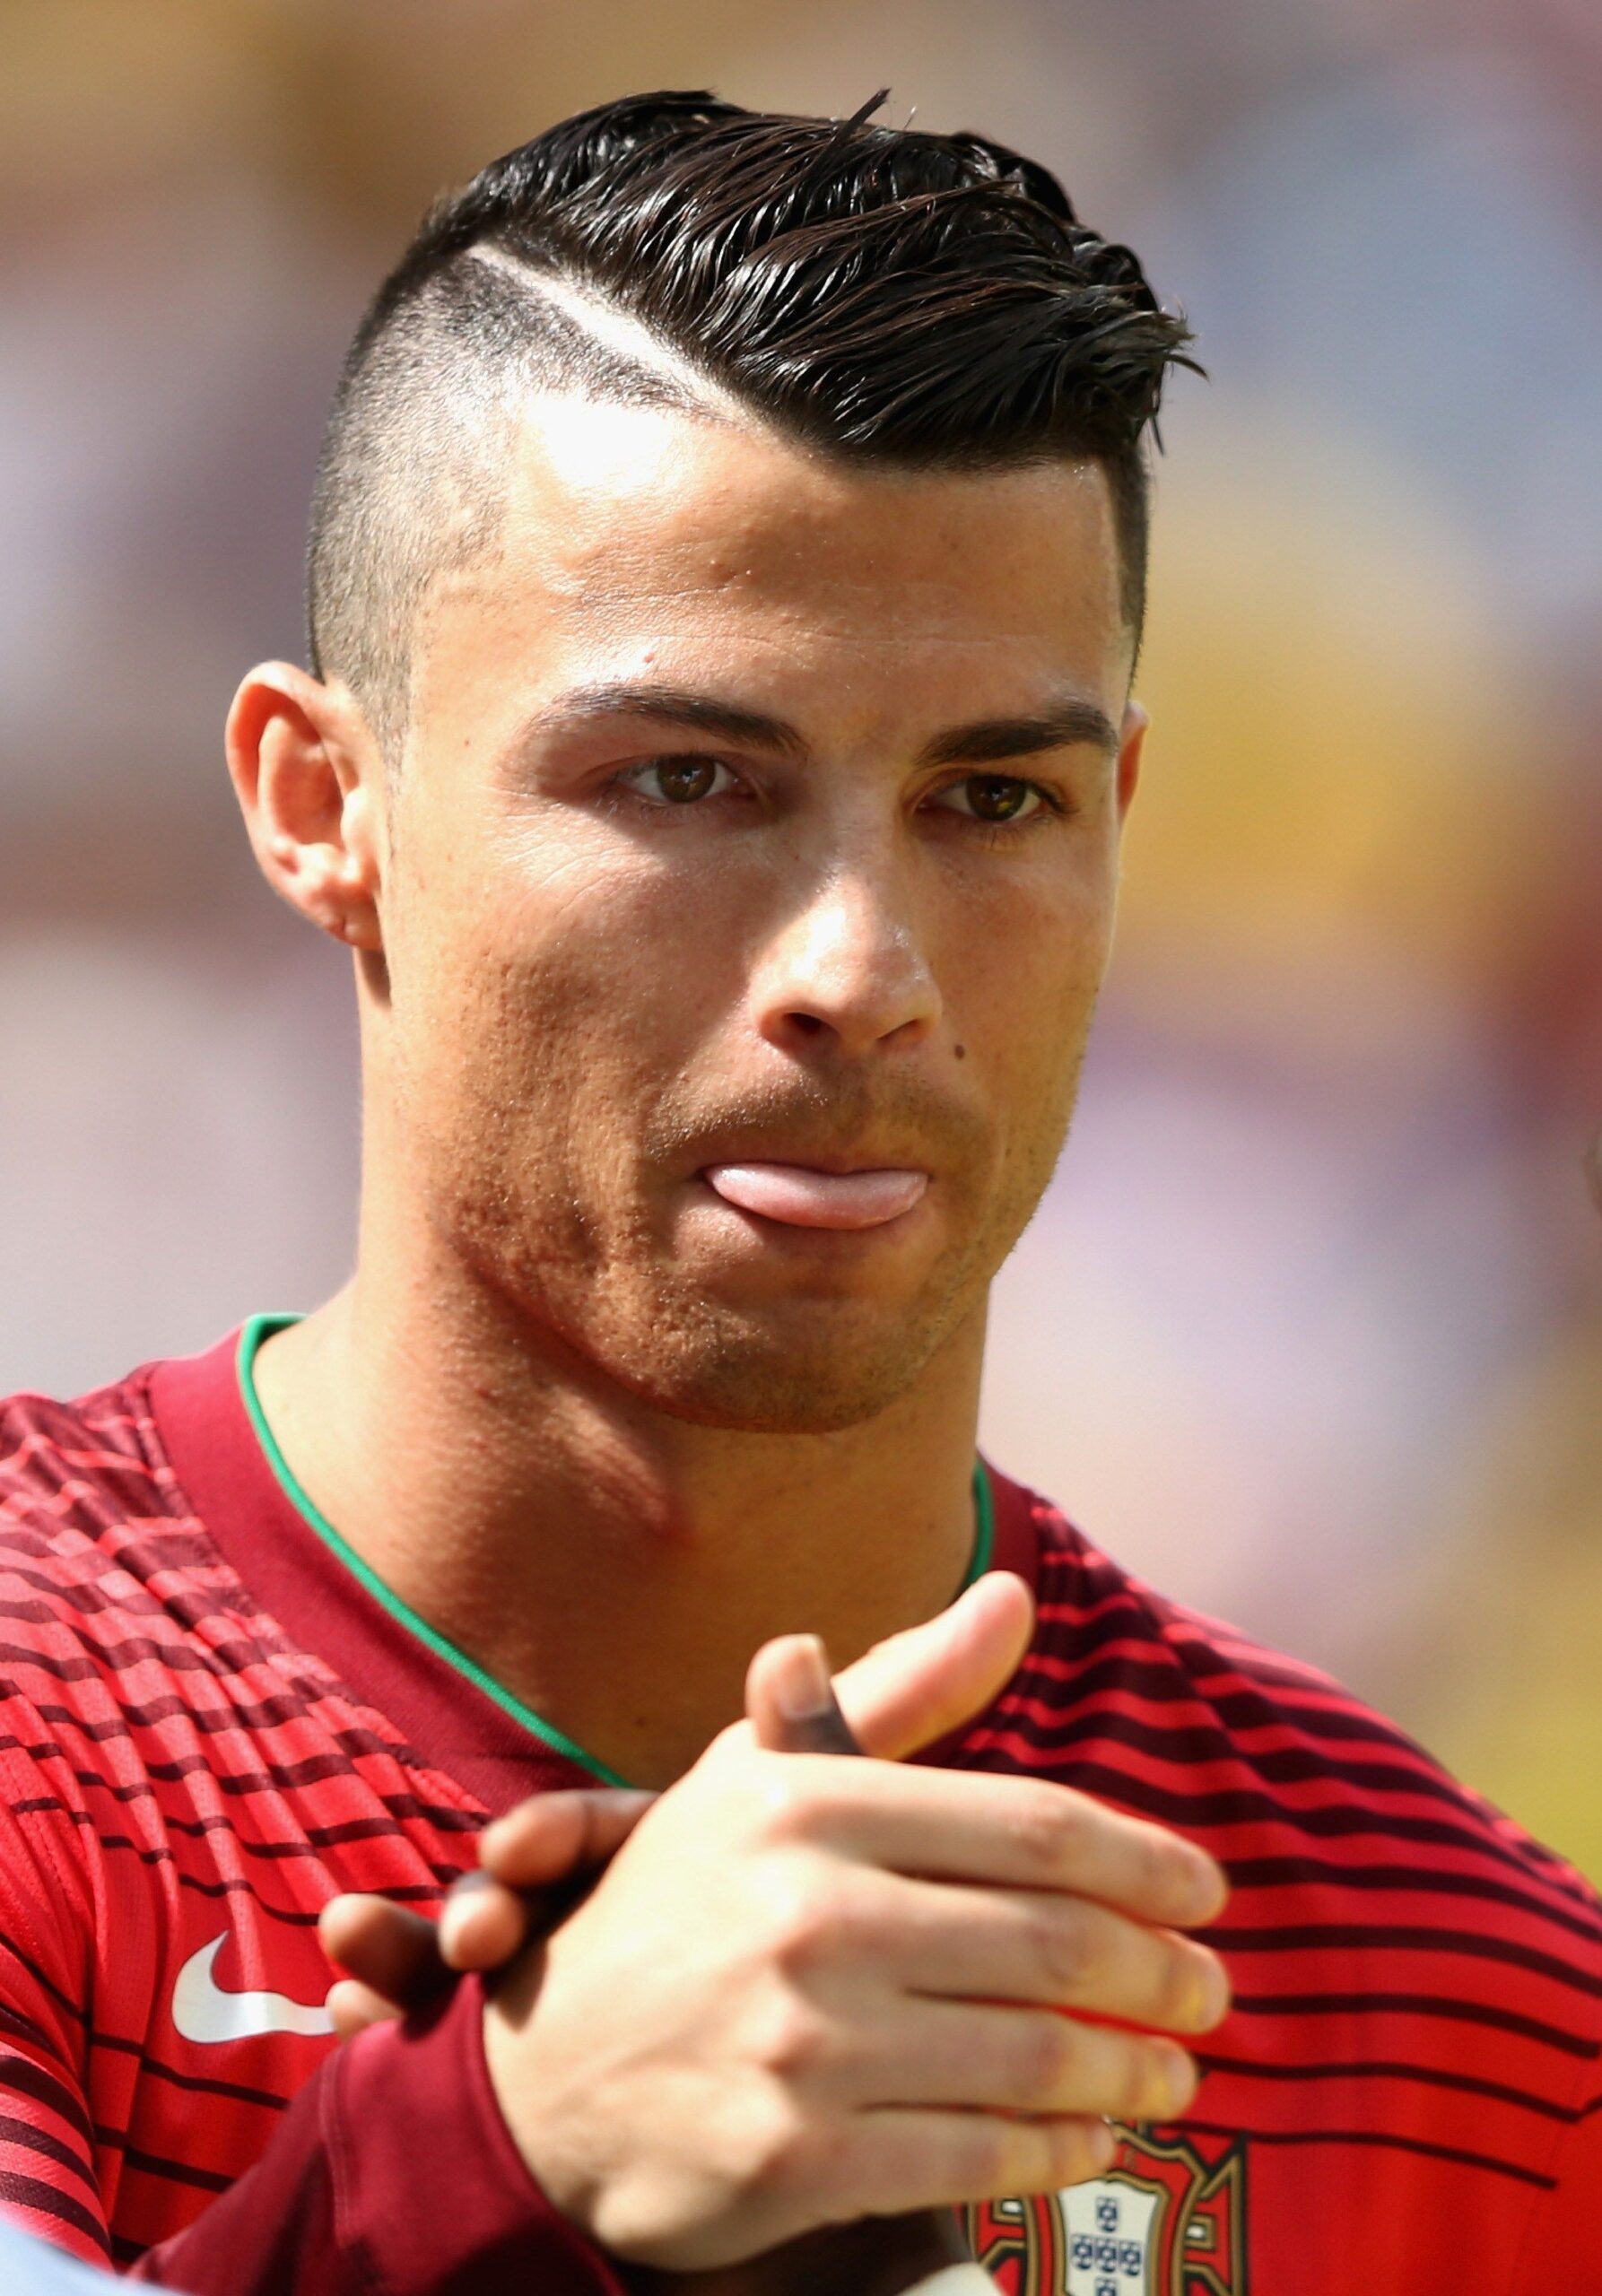 Ronaldo's comb over with part styles